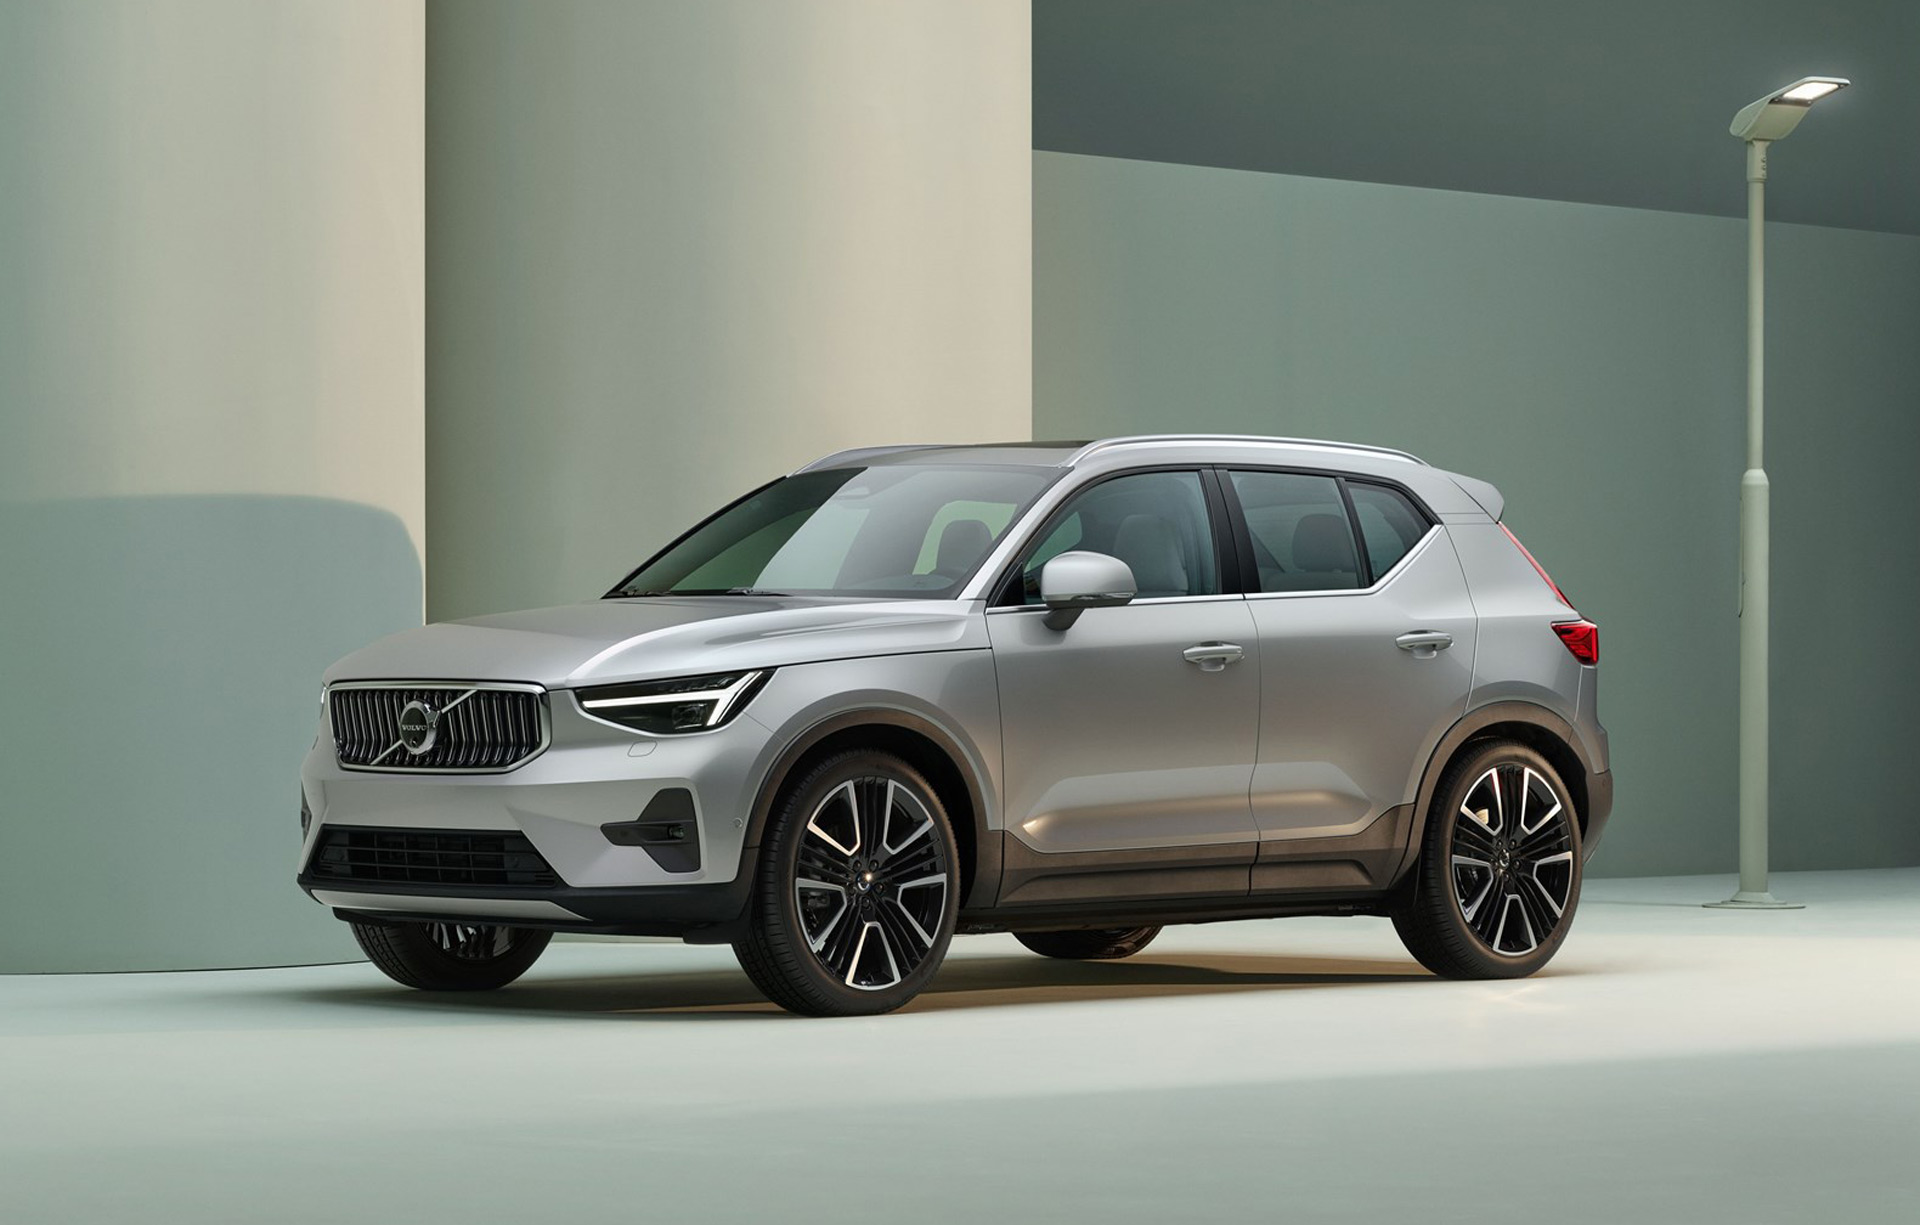 2023 Volvo XC40 arrives with new look fully electrified powertrain